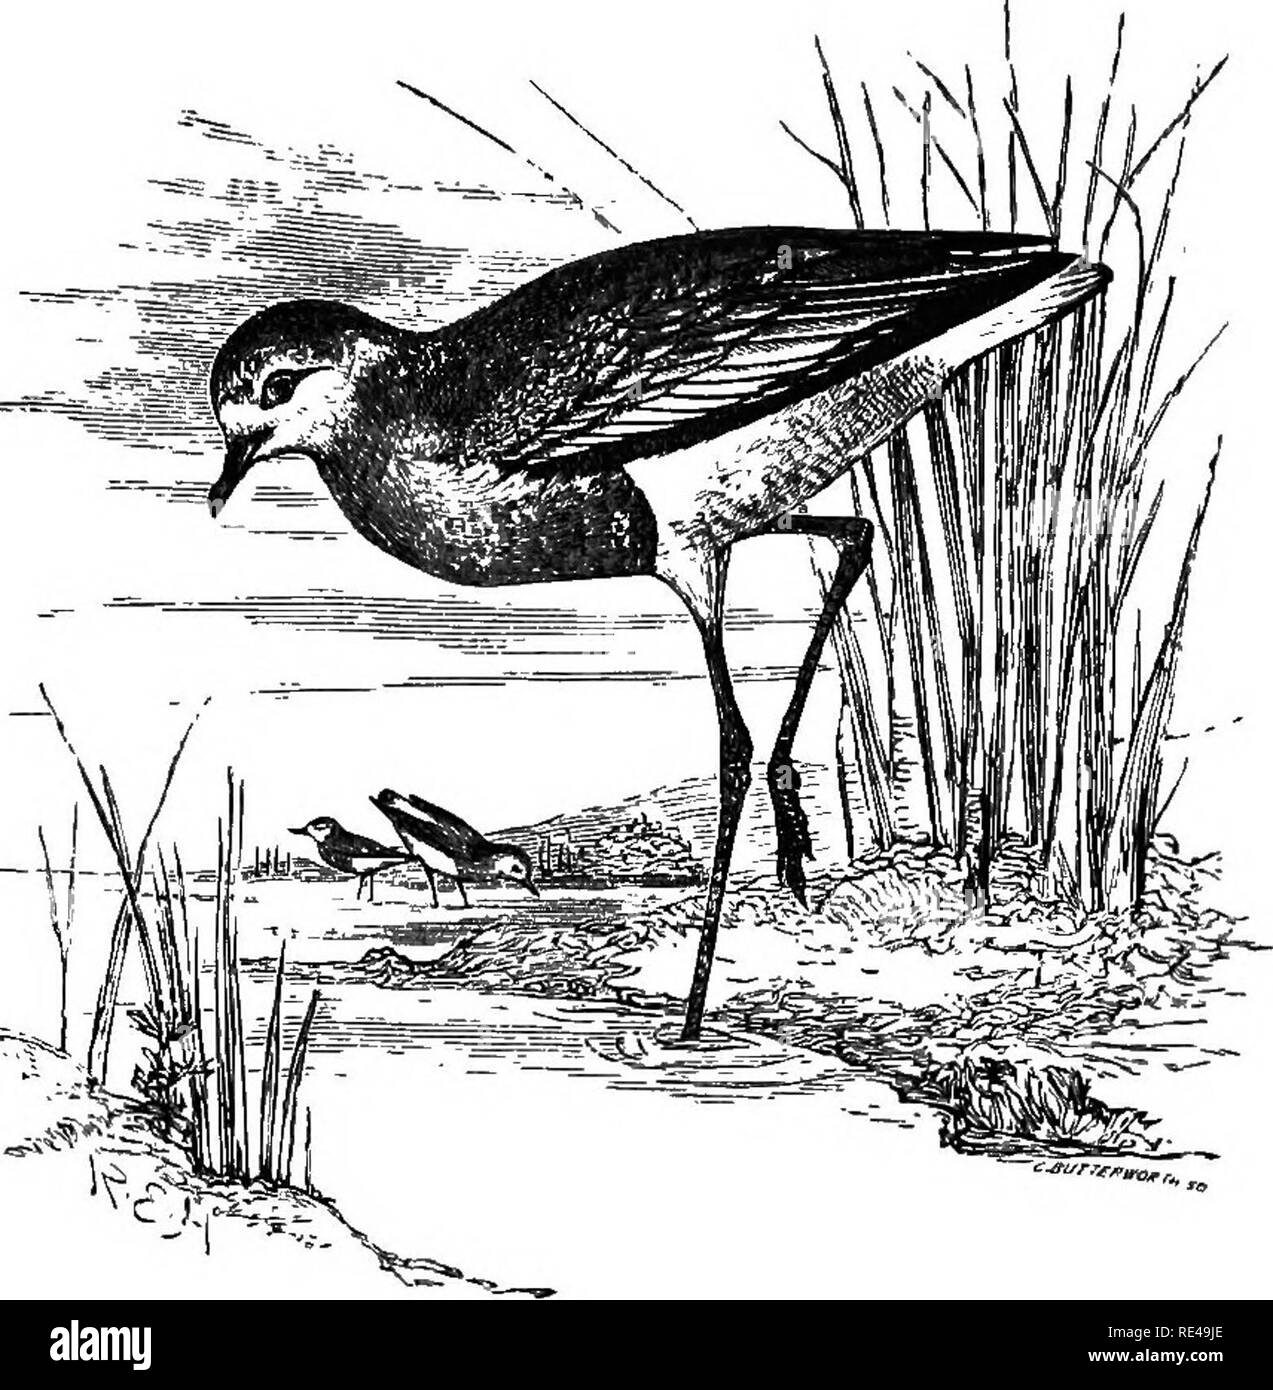 . The geographical distribution of the family Charadriidae, or, The plovers, sandpipers, snipes, and their allies . Shore birds. VANELLUS. 213. VANELLUS LEUCURUS. WEITE-TAILEB LAPWING. Vanellus caud^ omnino albS,. No local races of this species are known. Charadrius leucurus, Lichtenstein, Verz. Doubl. Mus. Berlin, p. 70 (1823). Vanellus villotaei, Audouin, Escpl. Savign. PI. Ois. Egypte, p. 297 (1826). Vanellus flavipes, Savigny,fide Cuvier, Regne An. i. p. 503 (1829). Vanellus grallarius, Lesson, Traite d'Orn. p. 542 (1831). Vanellus leucurus {Licht.), Blyth, Journ. As. Soc. Bang. xiii. p. 3 Stock Photo